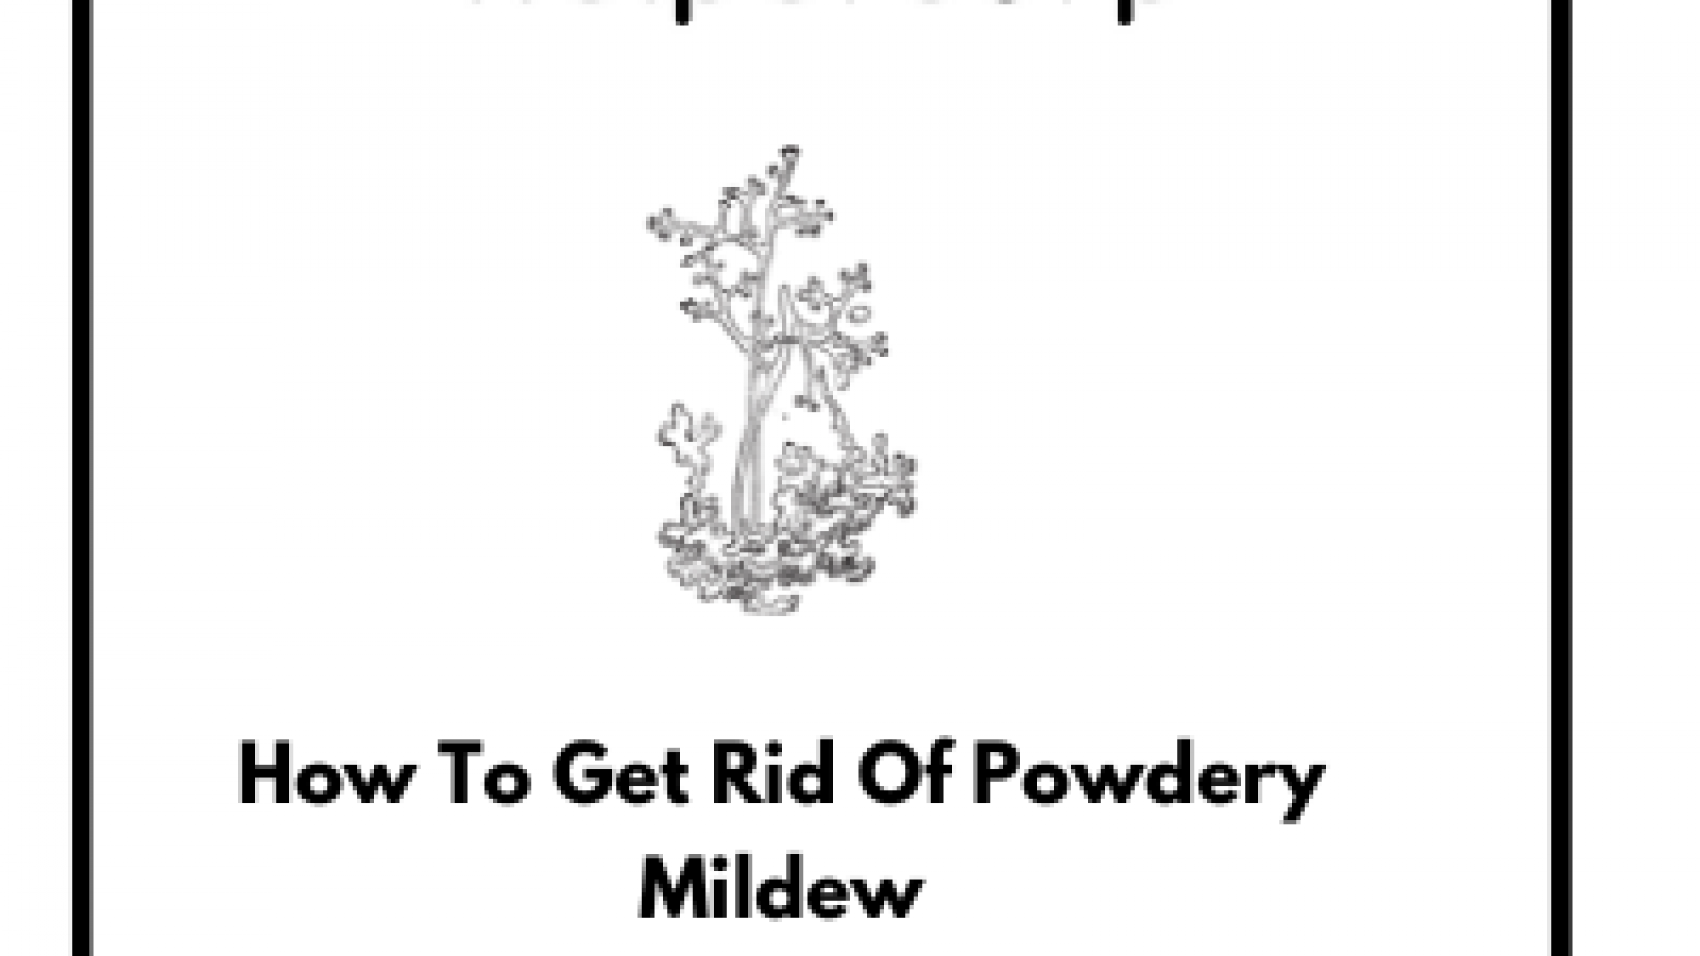 How To Get Rid Of Powdery Mildew